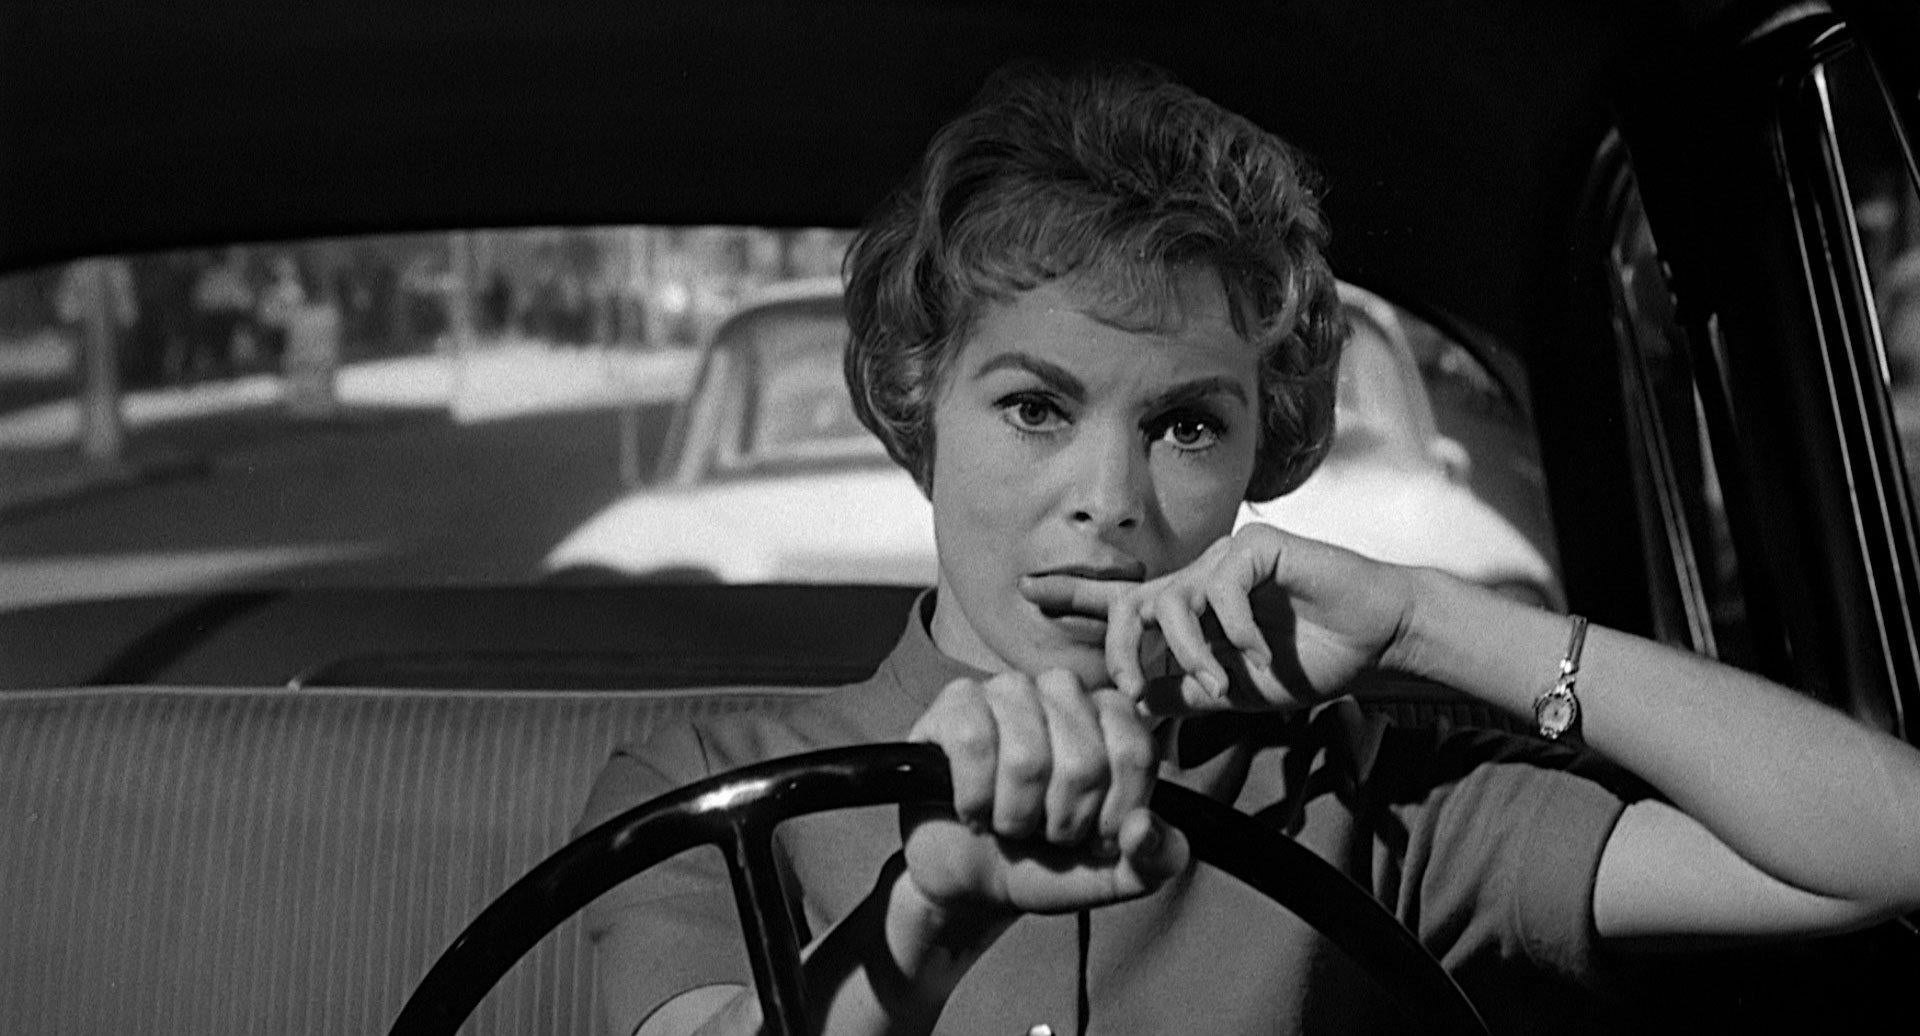 janet-leigh-as-marion-psycho-1960.jpg